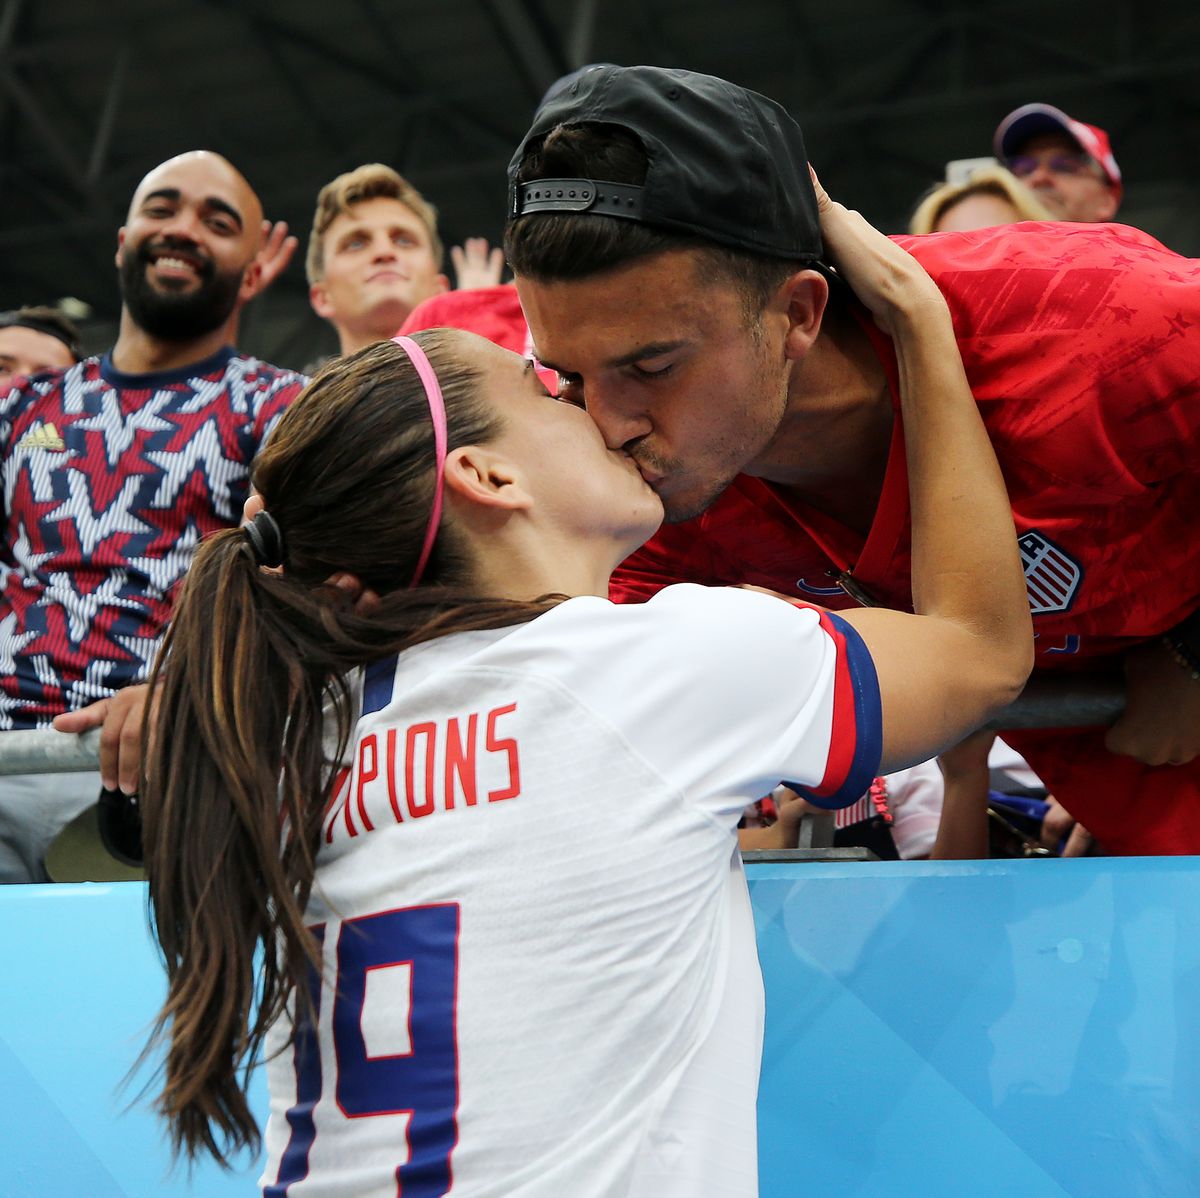 Soccer star Alex Morgan is not only USWNT co-captain — she also